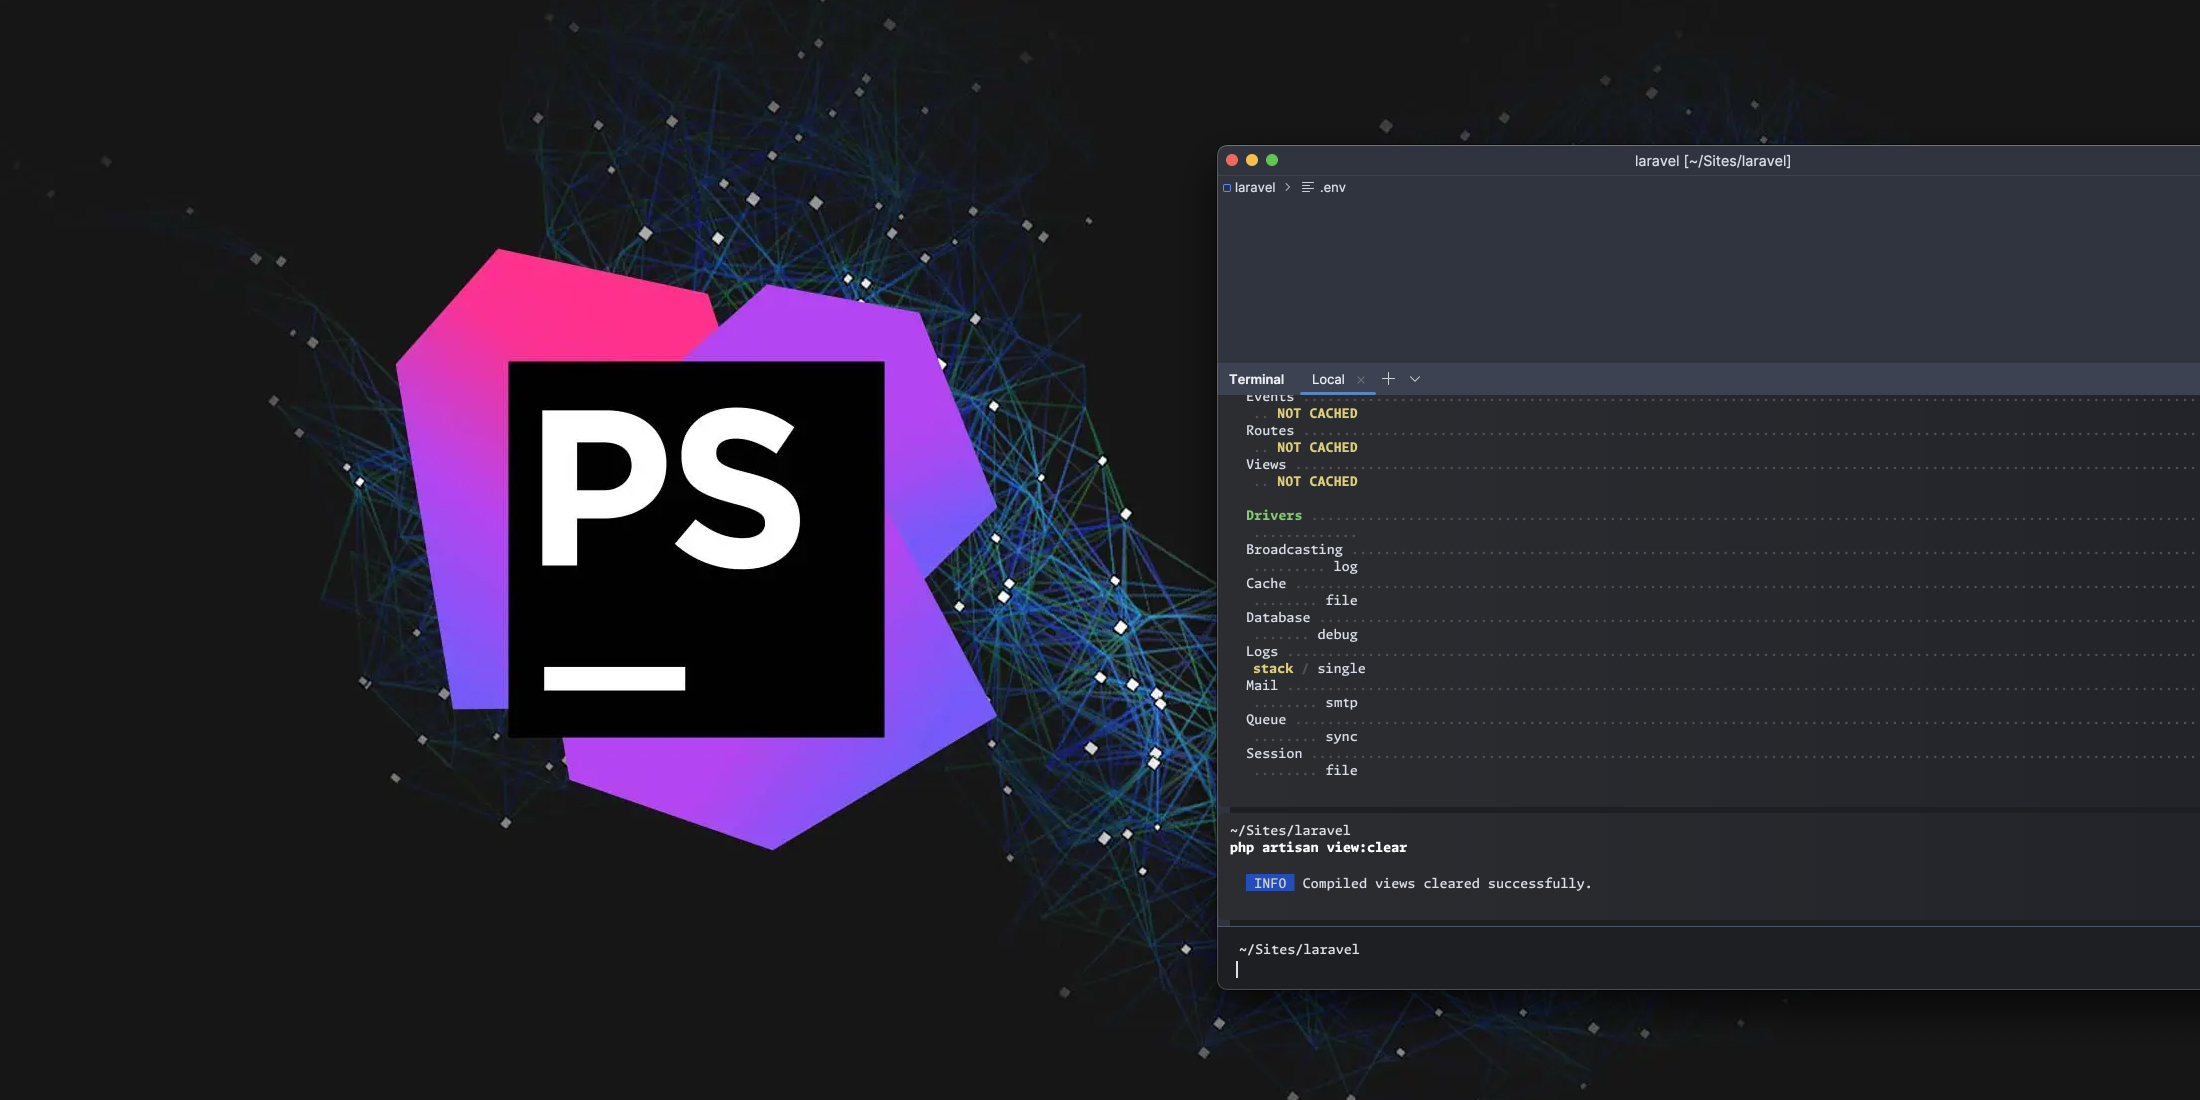 PhpStorm is getting a brand new terminal